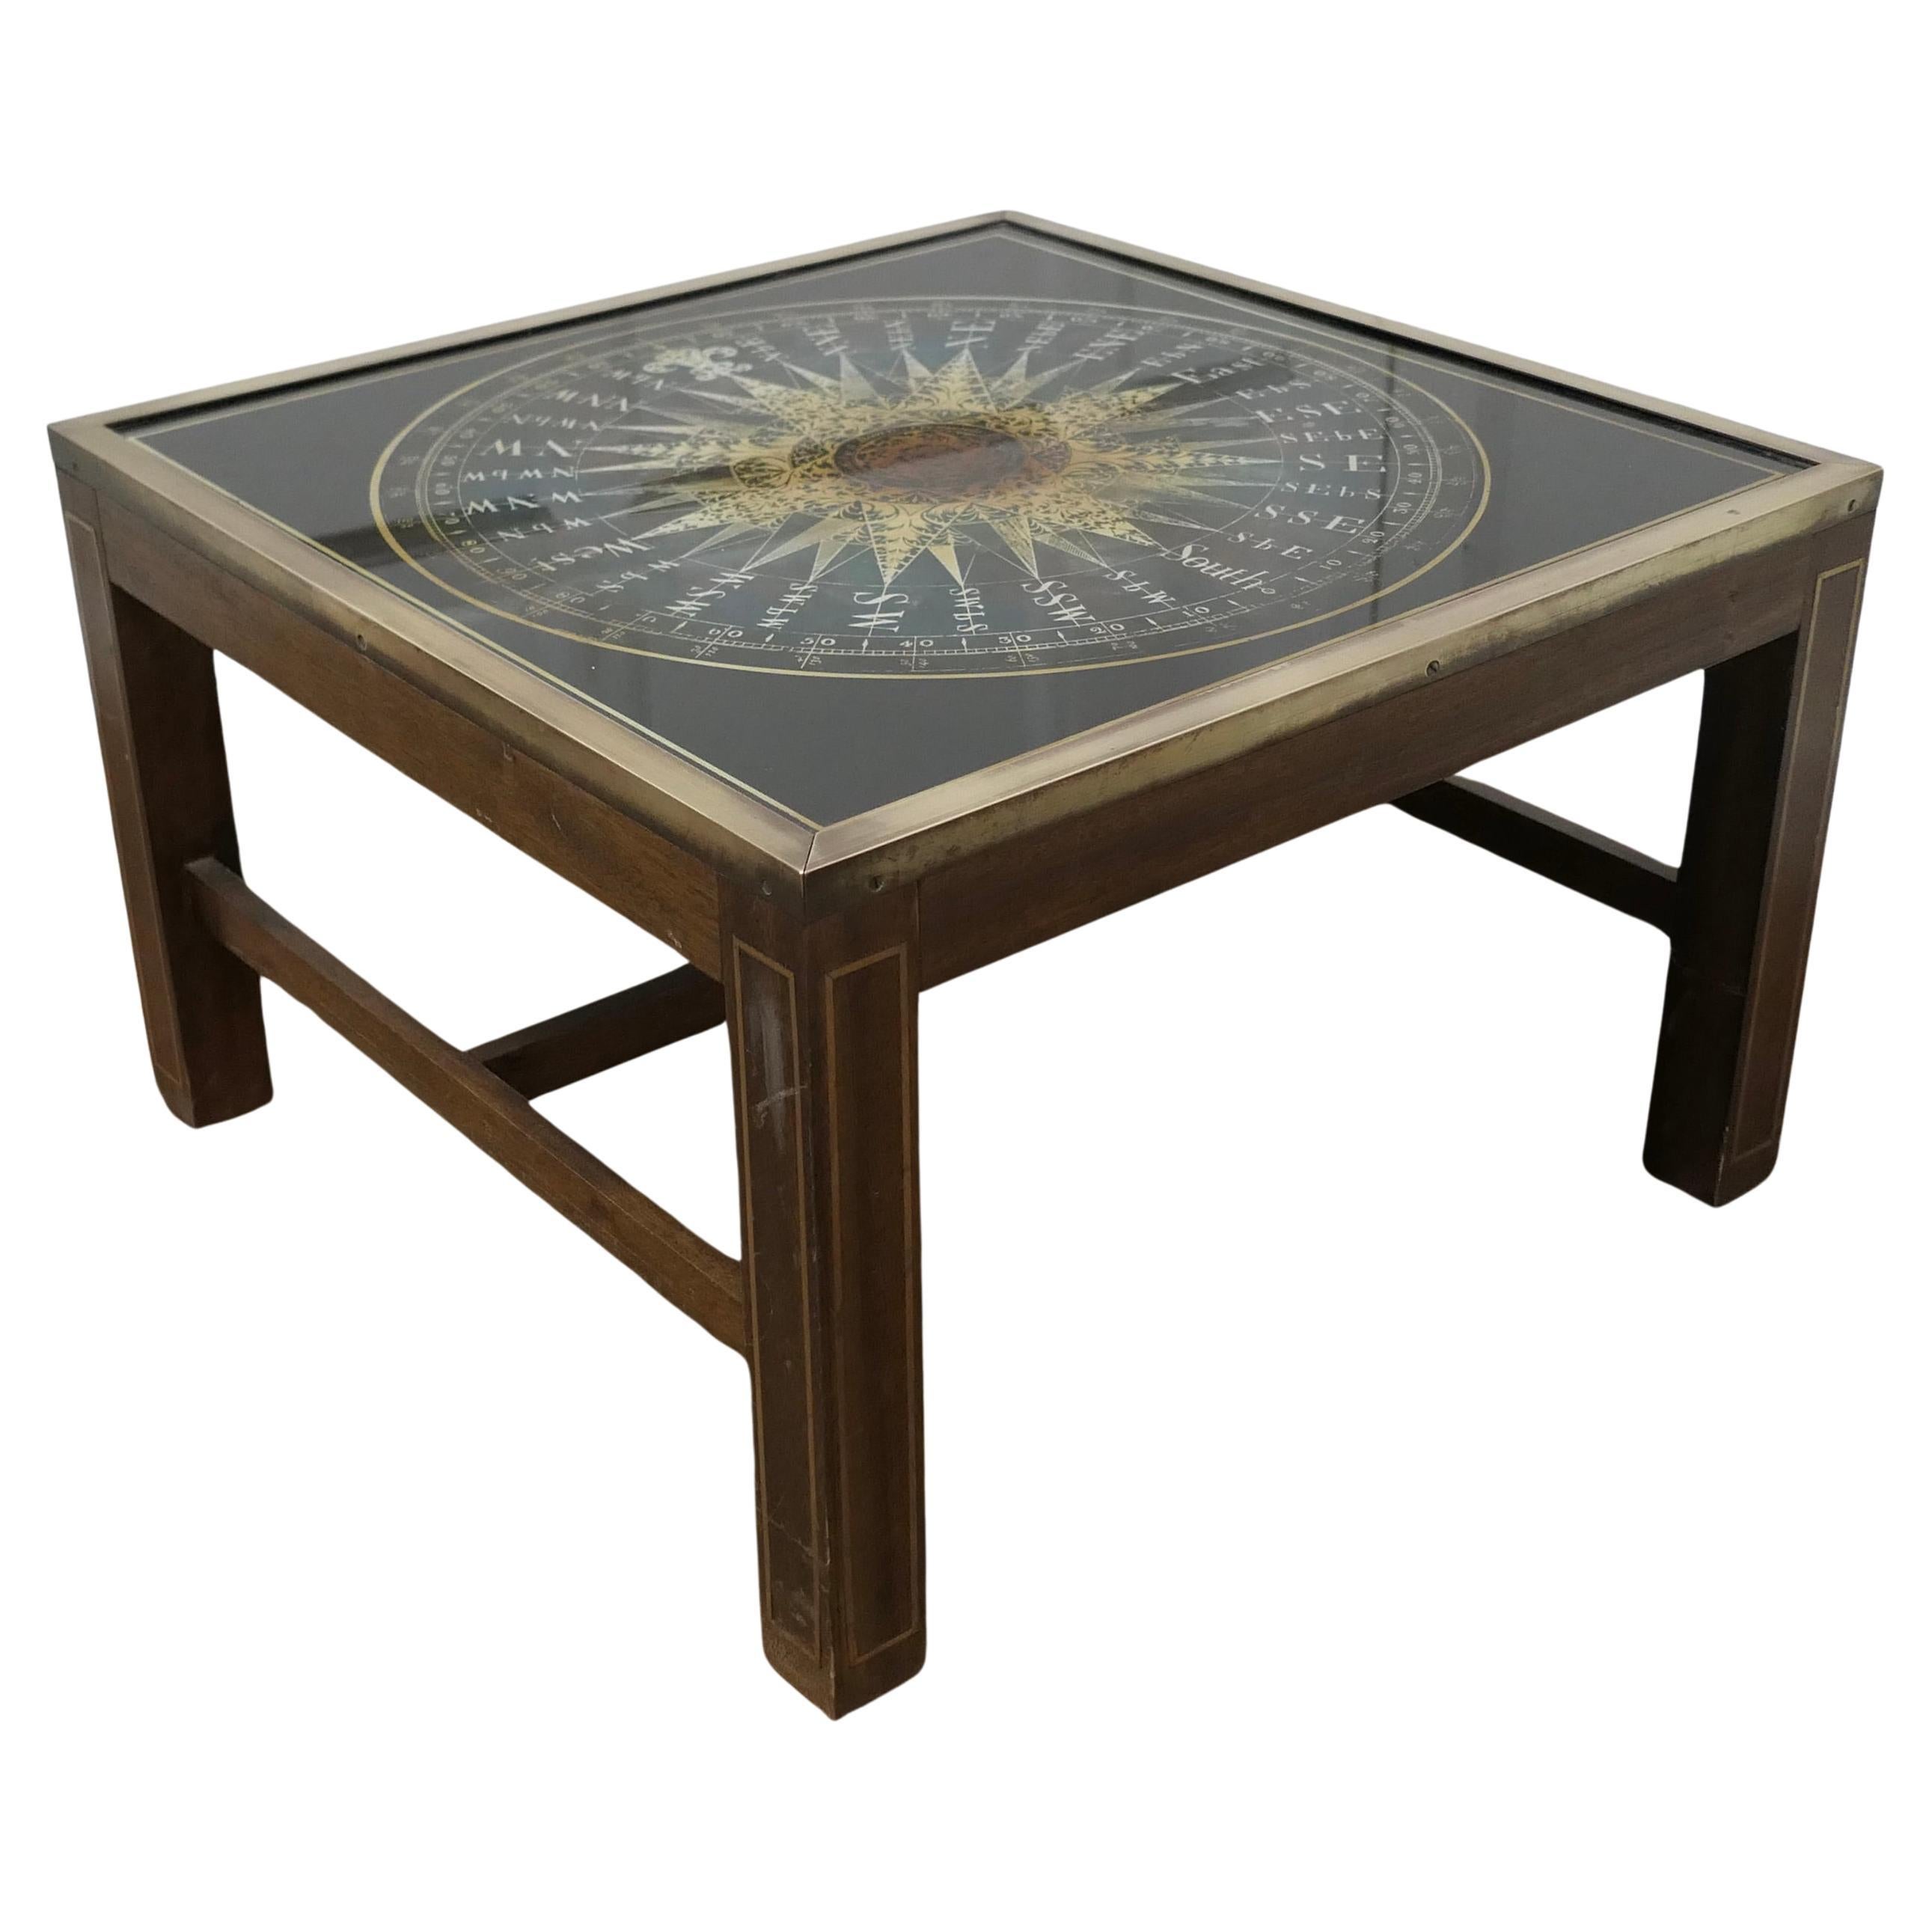 Midcentury Maison Jansen Campaign Style Coffee Table

A Cube Coffee table, the base has brass trim and inlay, the top is a reverse painted glass in black and gold with an English drawing of a compass by Samuel Dunn Clements Inn 1774
This superb